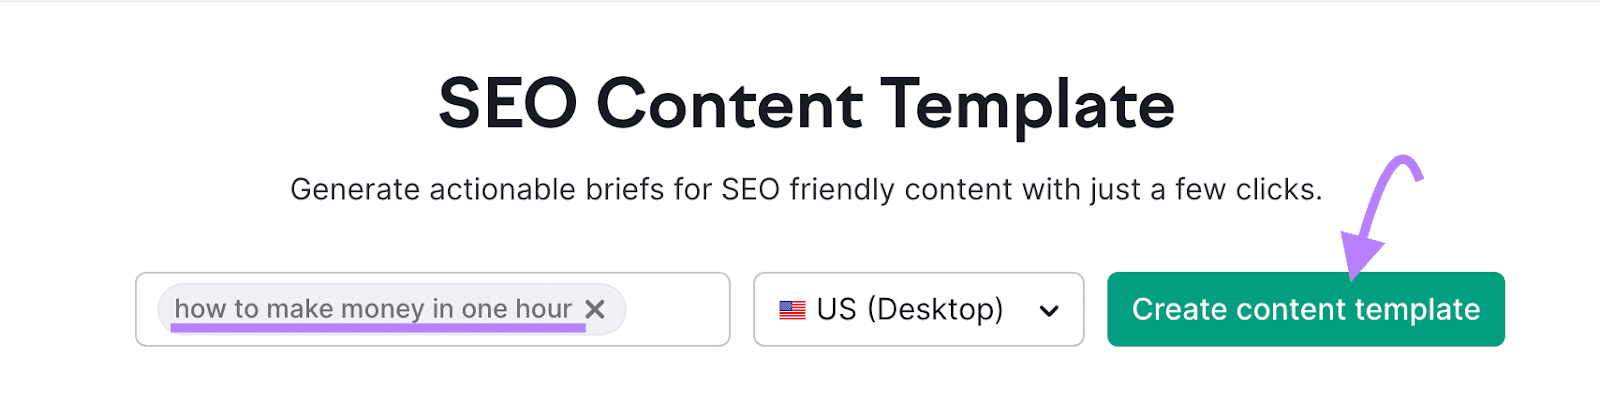 "how to make money in one hour" entered into SEO Content Template search bar